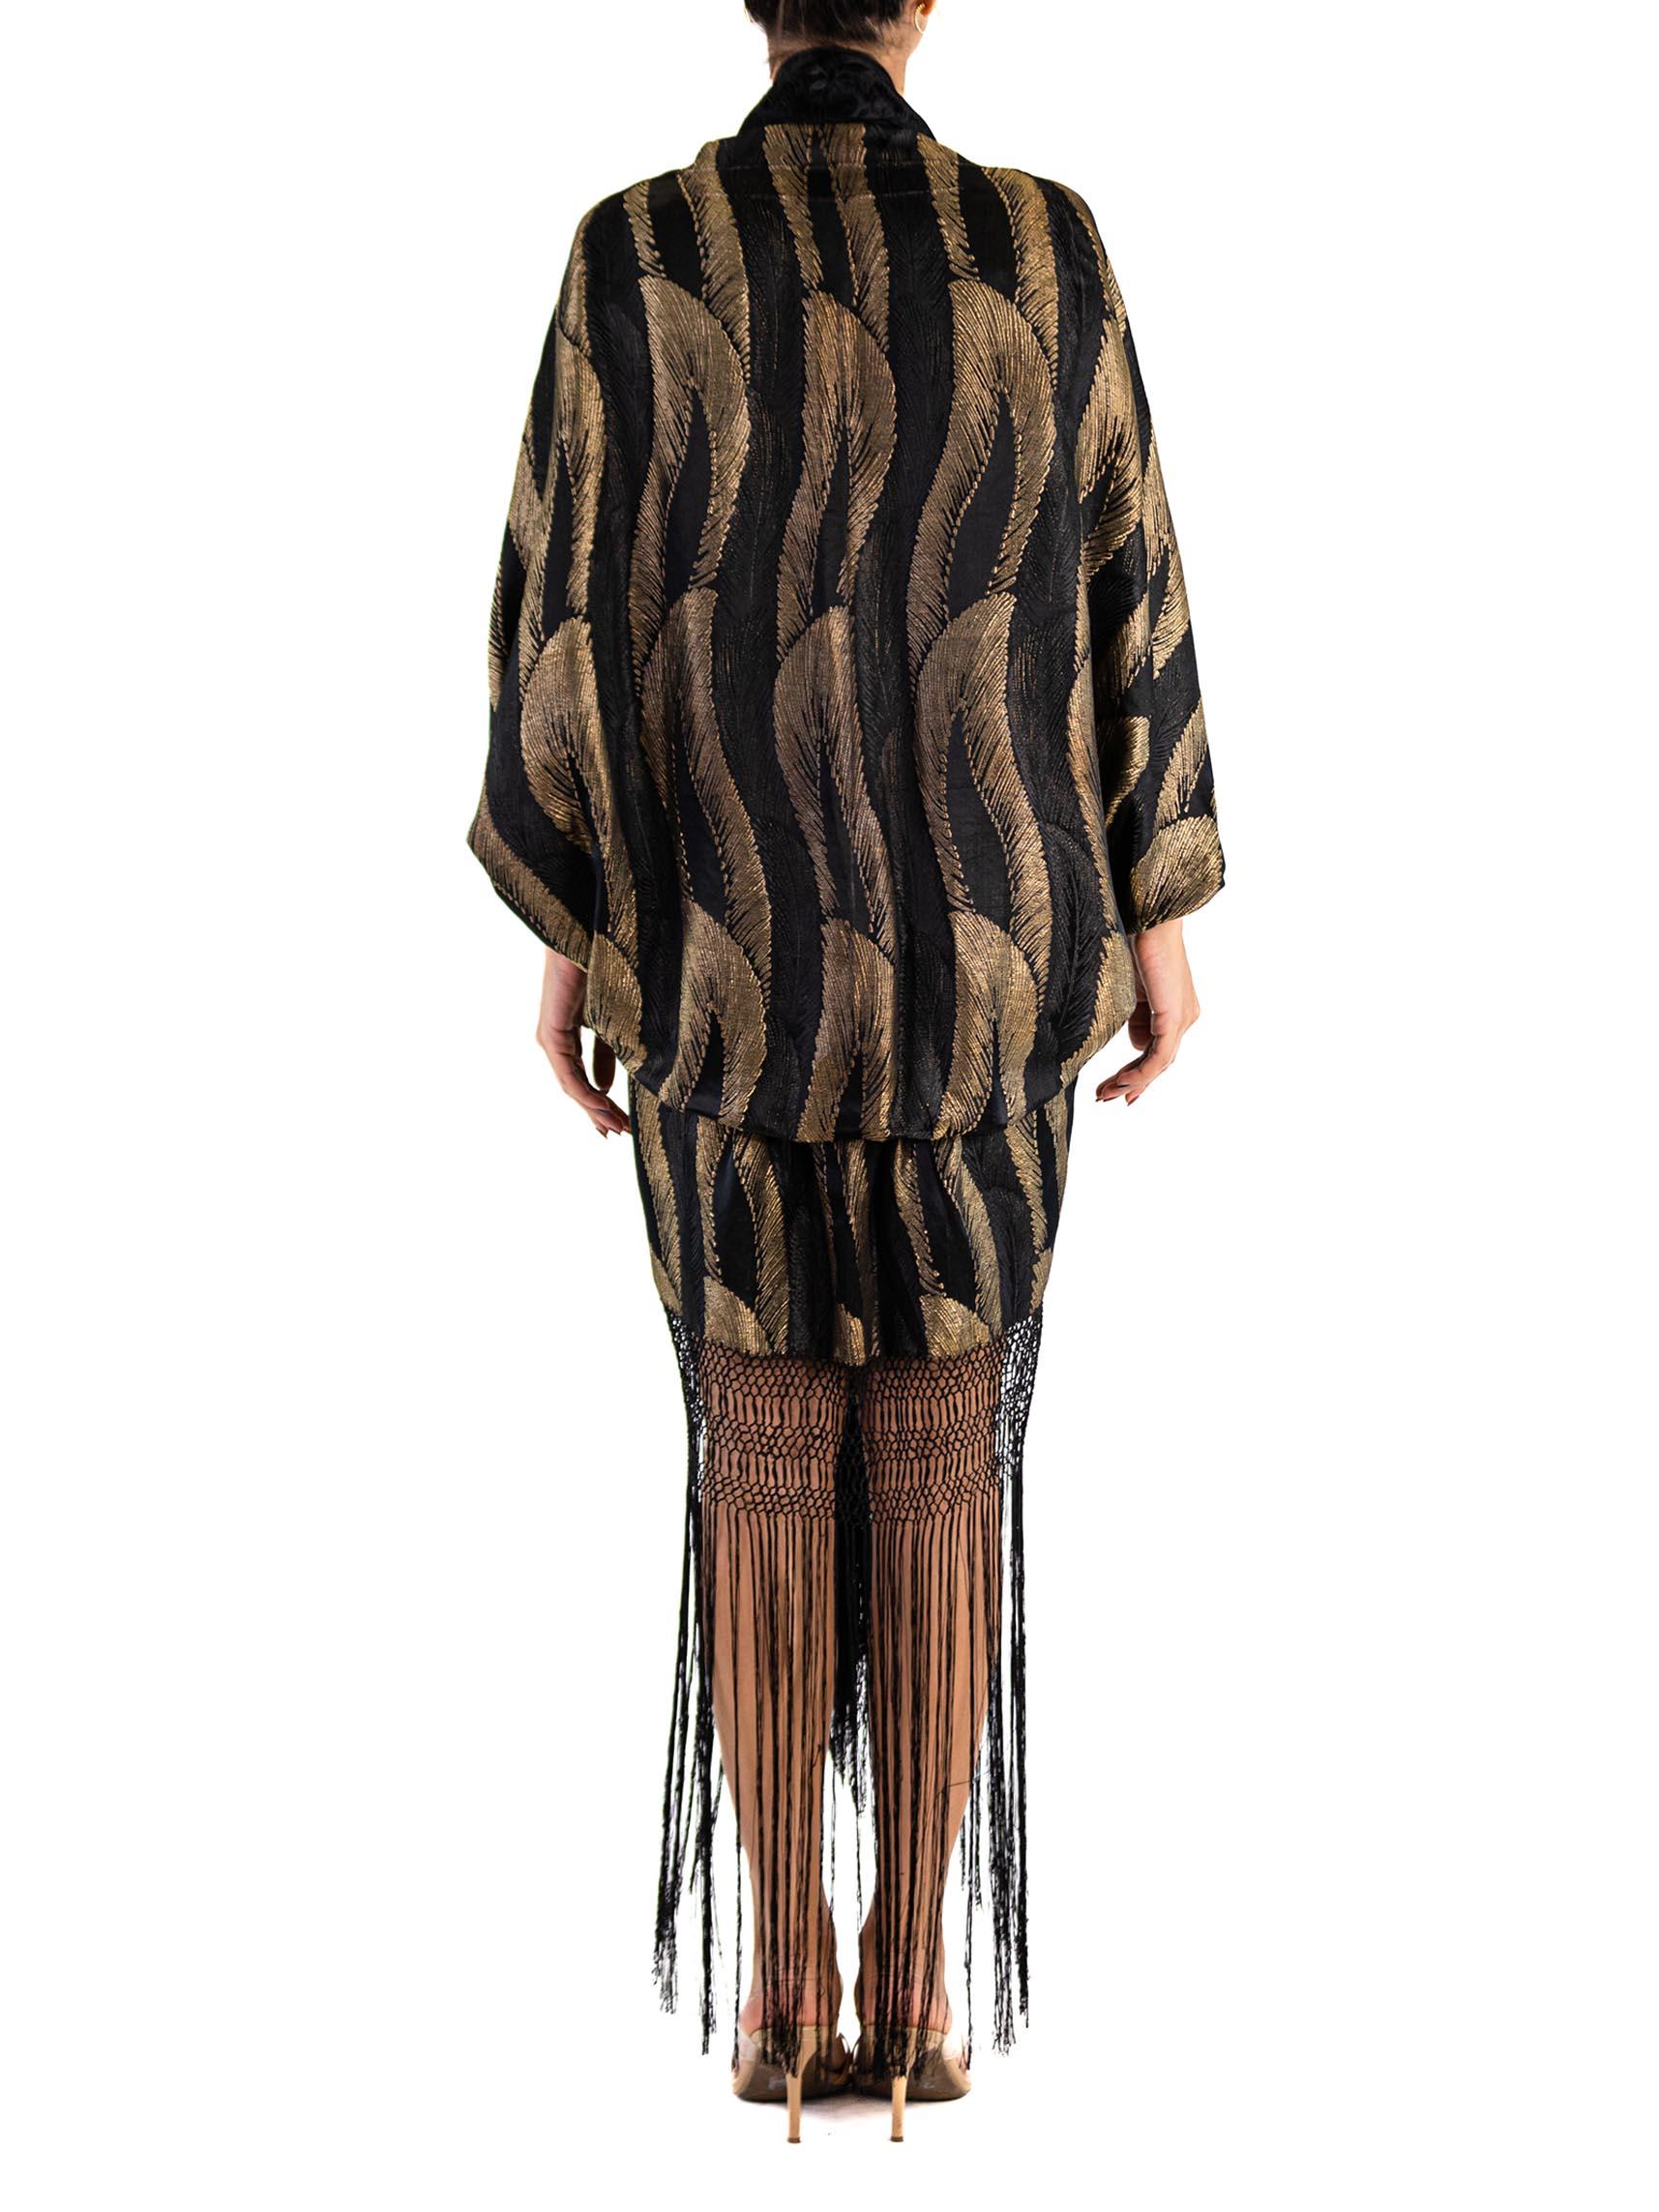 MORPHEW ATELIER Black & Gold Metallic Silk Lamé Cocoon With Fringe And Silver V For Sale 2